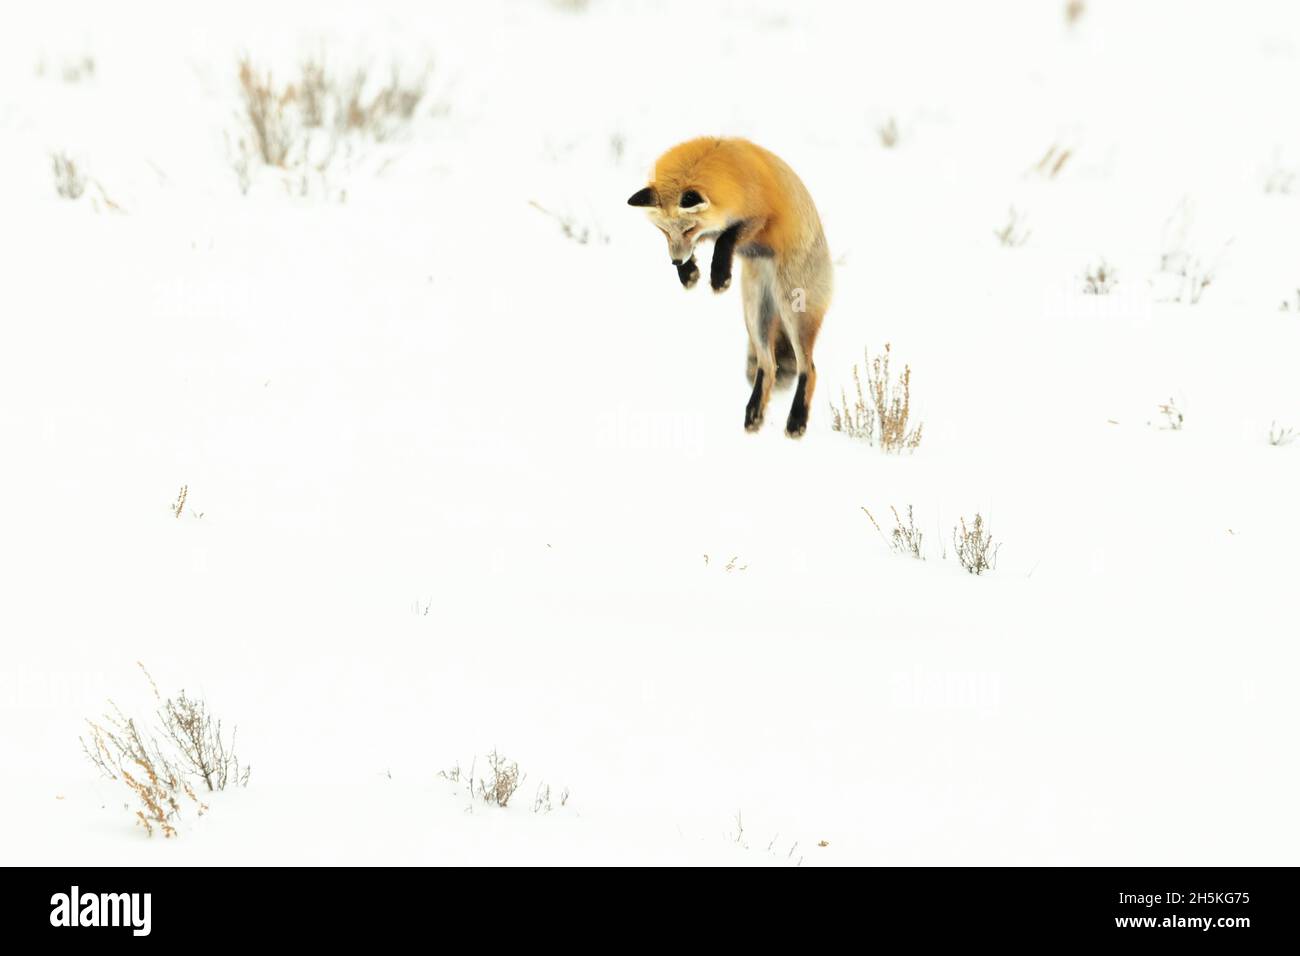 Red fox (Vulpes vulpes) up in the air, diving into a snowbank to catch food; Yellowstone National Park, Wyoming, United States of America Stock Photo